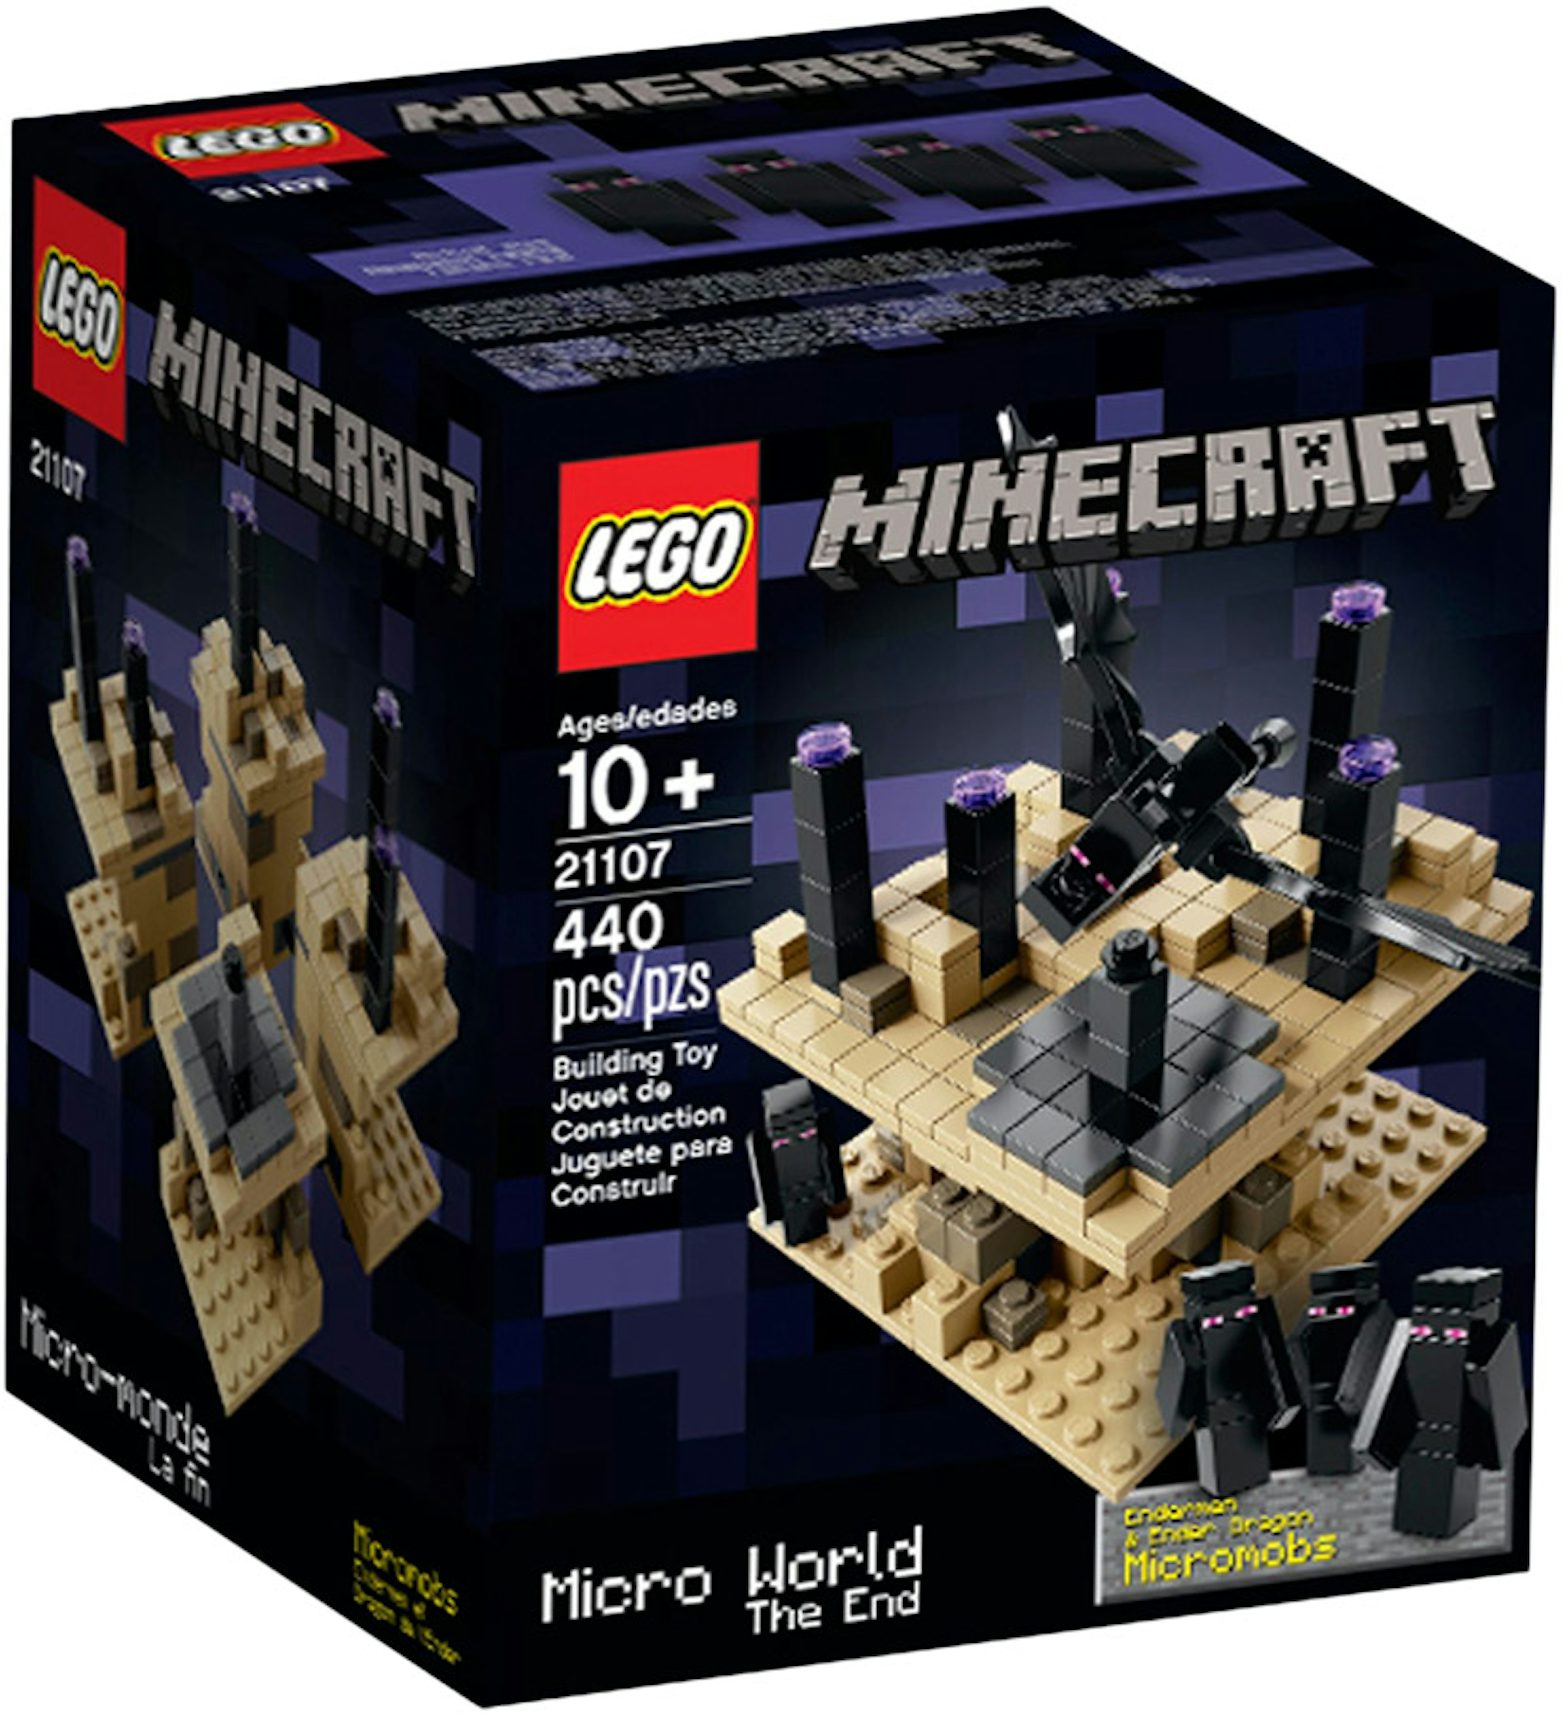 Minecraft Lego Set The Wither 21126 Complete 3 Minifigures & Instruction  Booklet